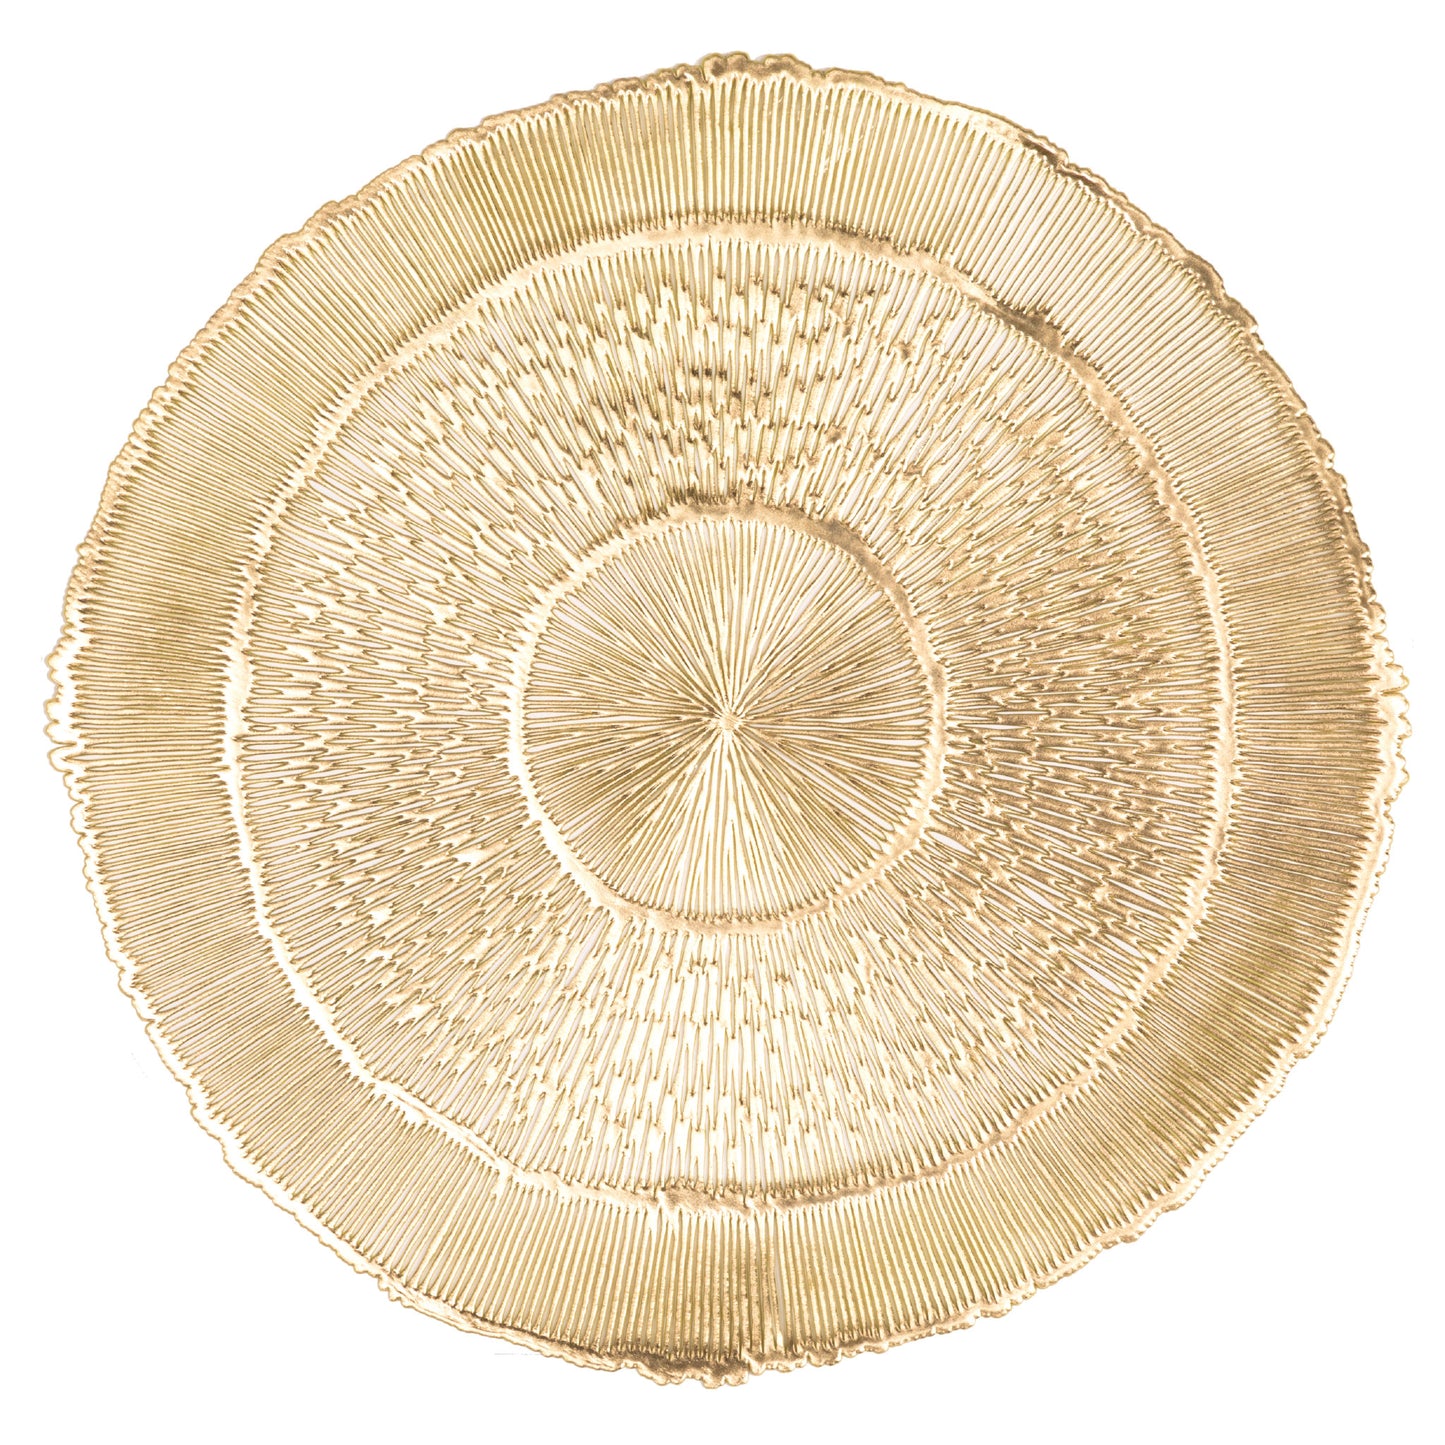 Zic Zac Capellini Placemat - Tree Gold